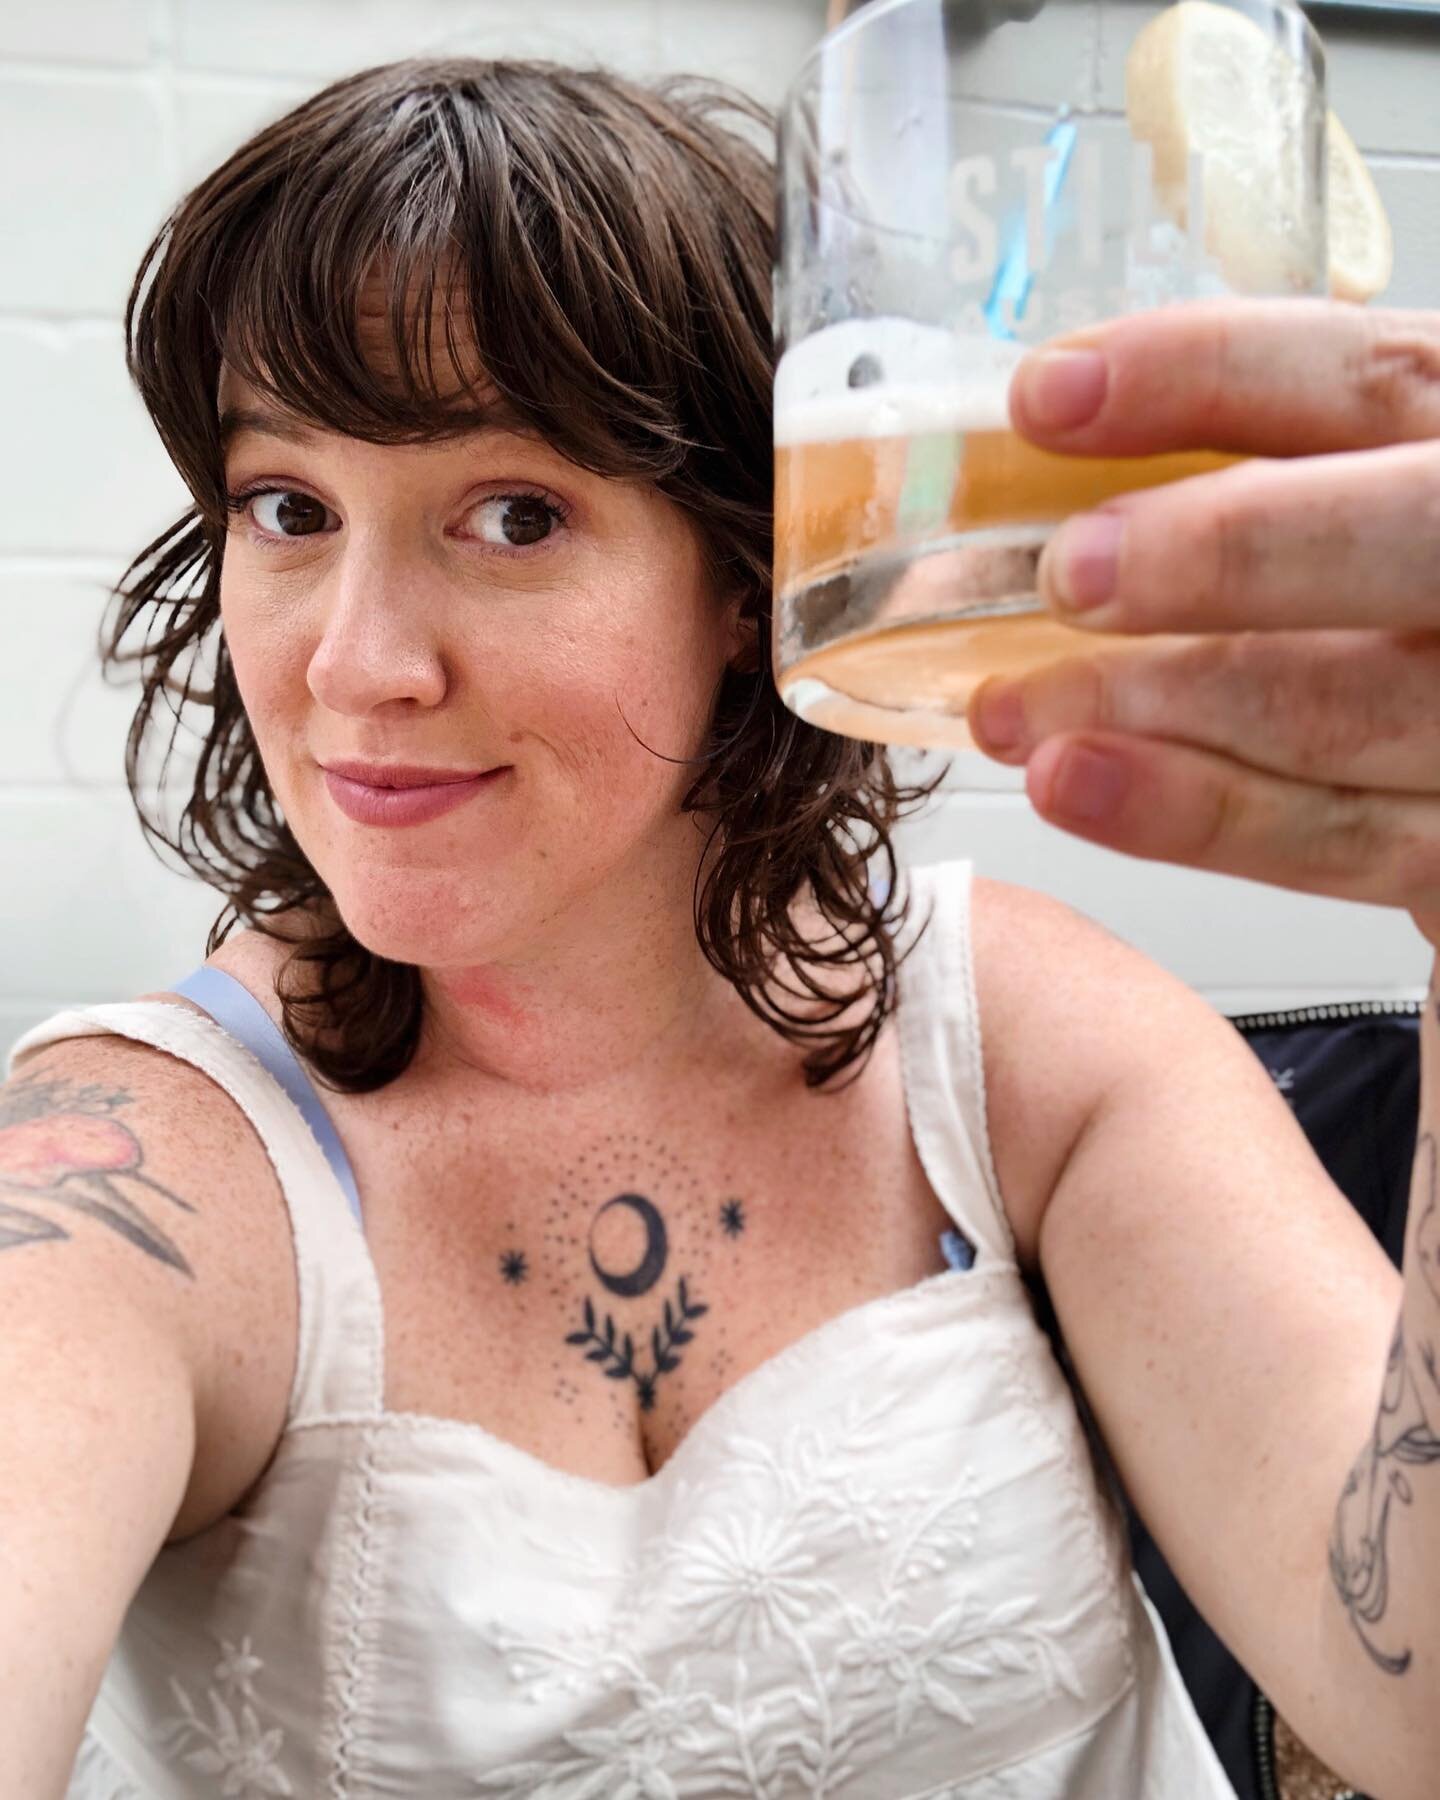 Cheers! I&rsquo;m Mary Helen McNally, a food stylist, cookbook author, and ceramics artist living in Austin, Texas. I enjoy peeling avocados, scrambling perfect eggs, and curating produce. 🔪 🥑 🍳